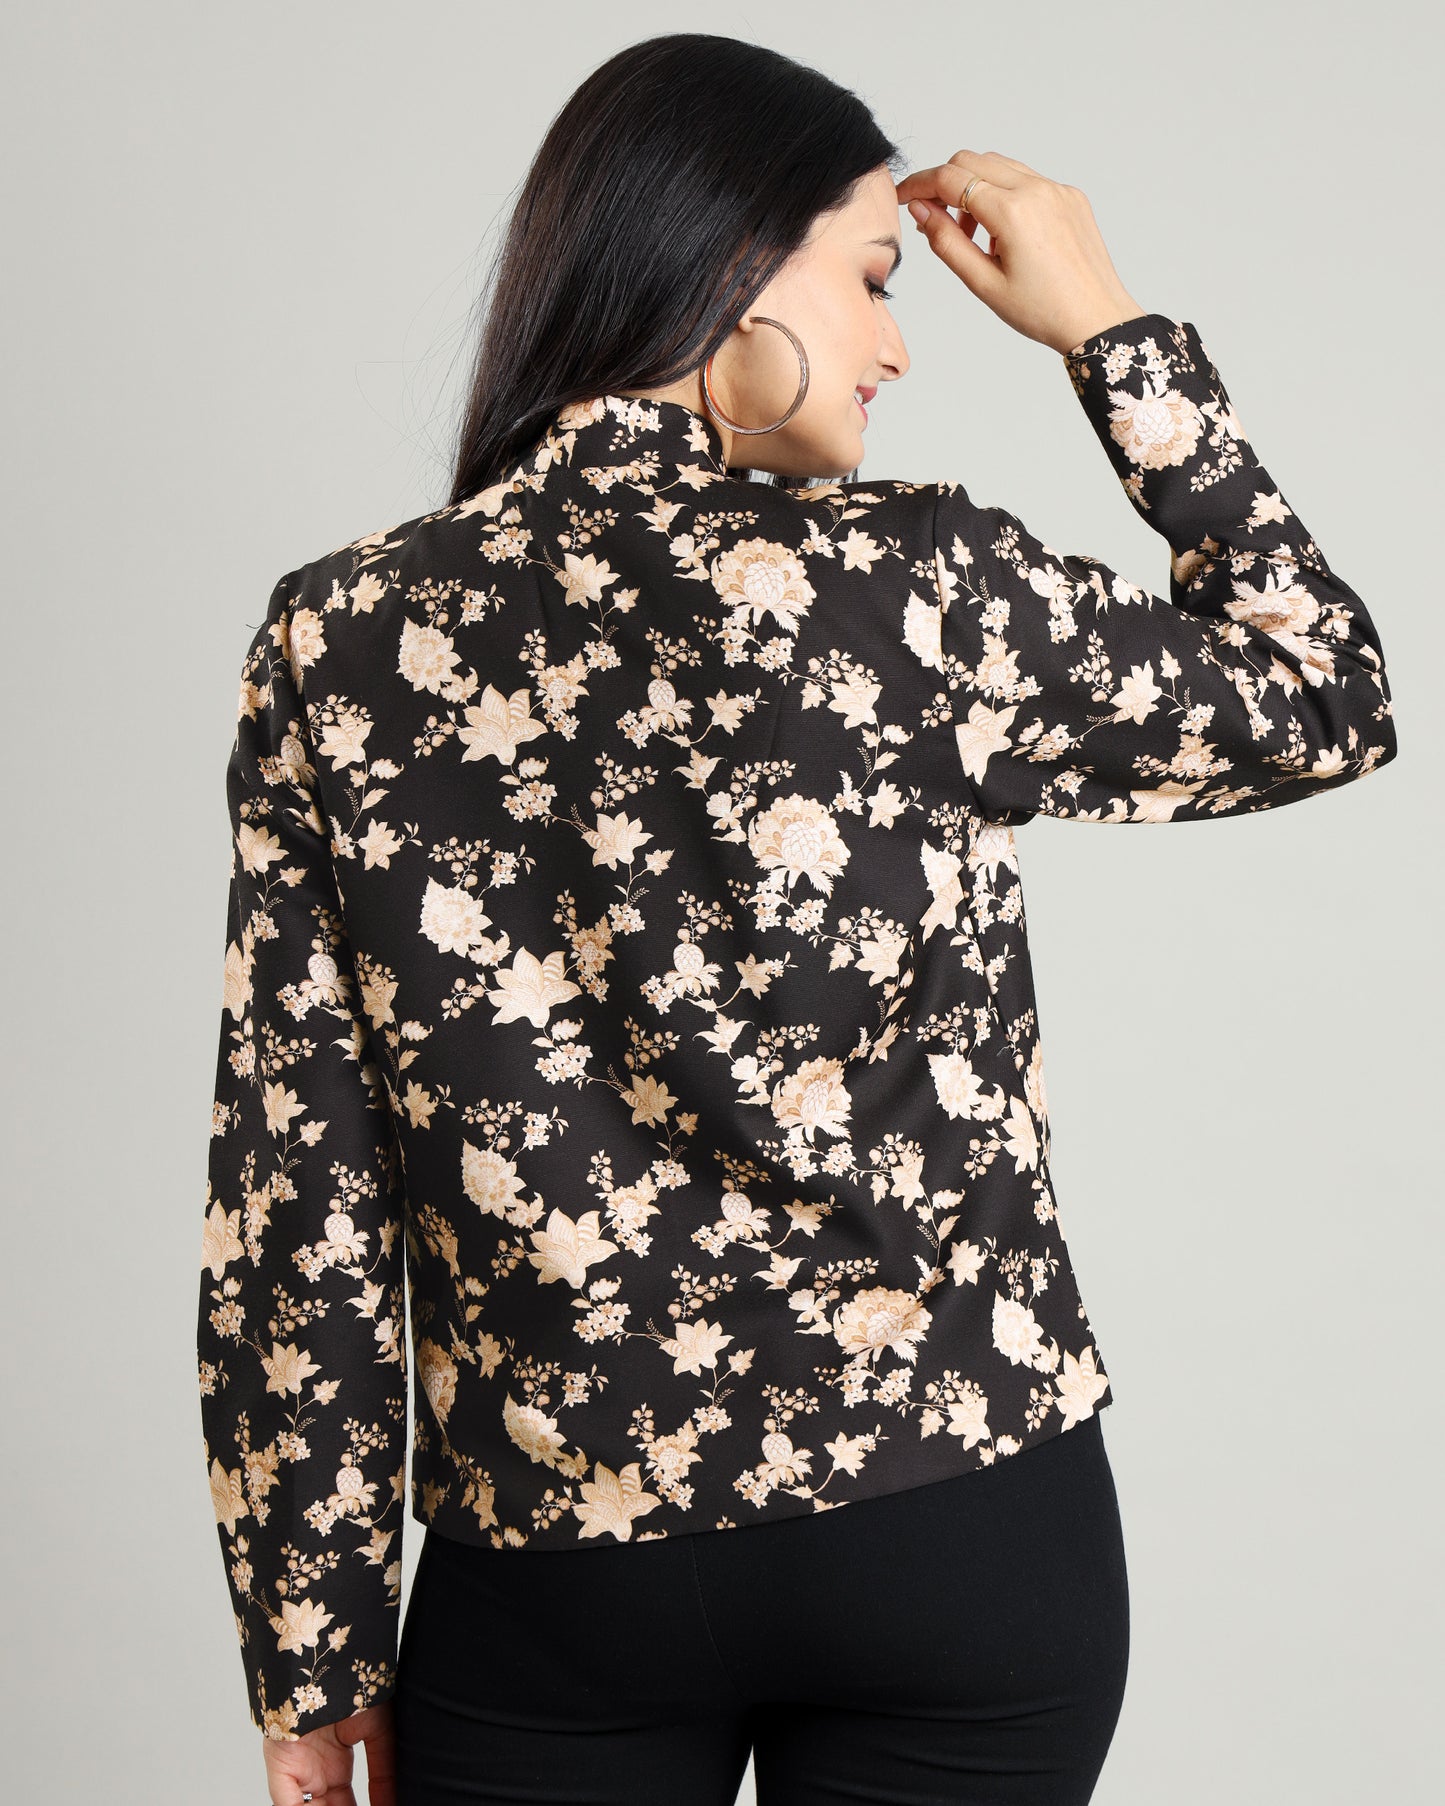 Women's Black Jacket: The Essential Layer